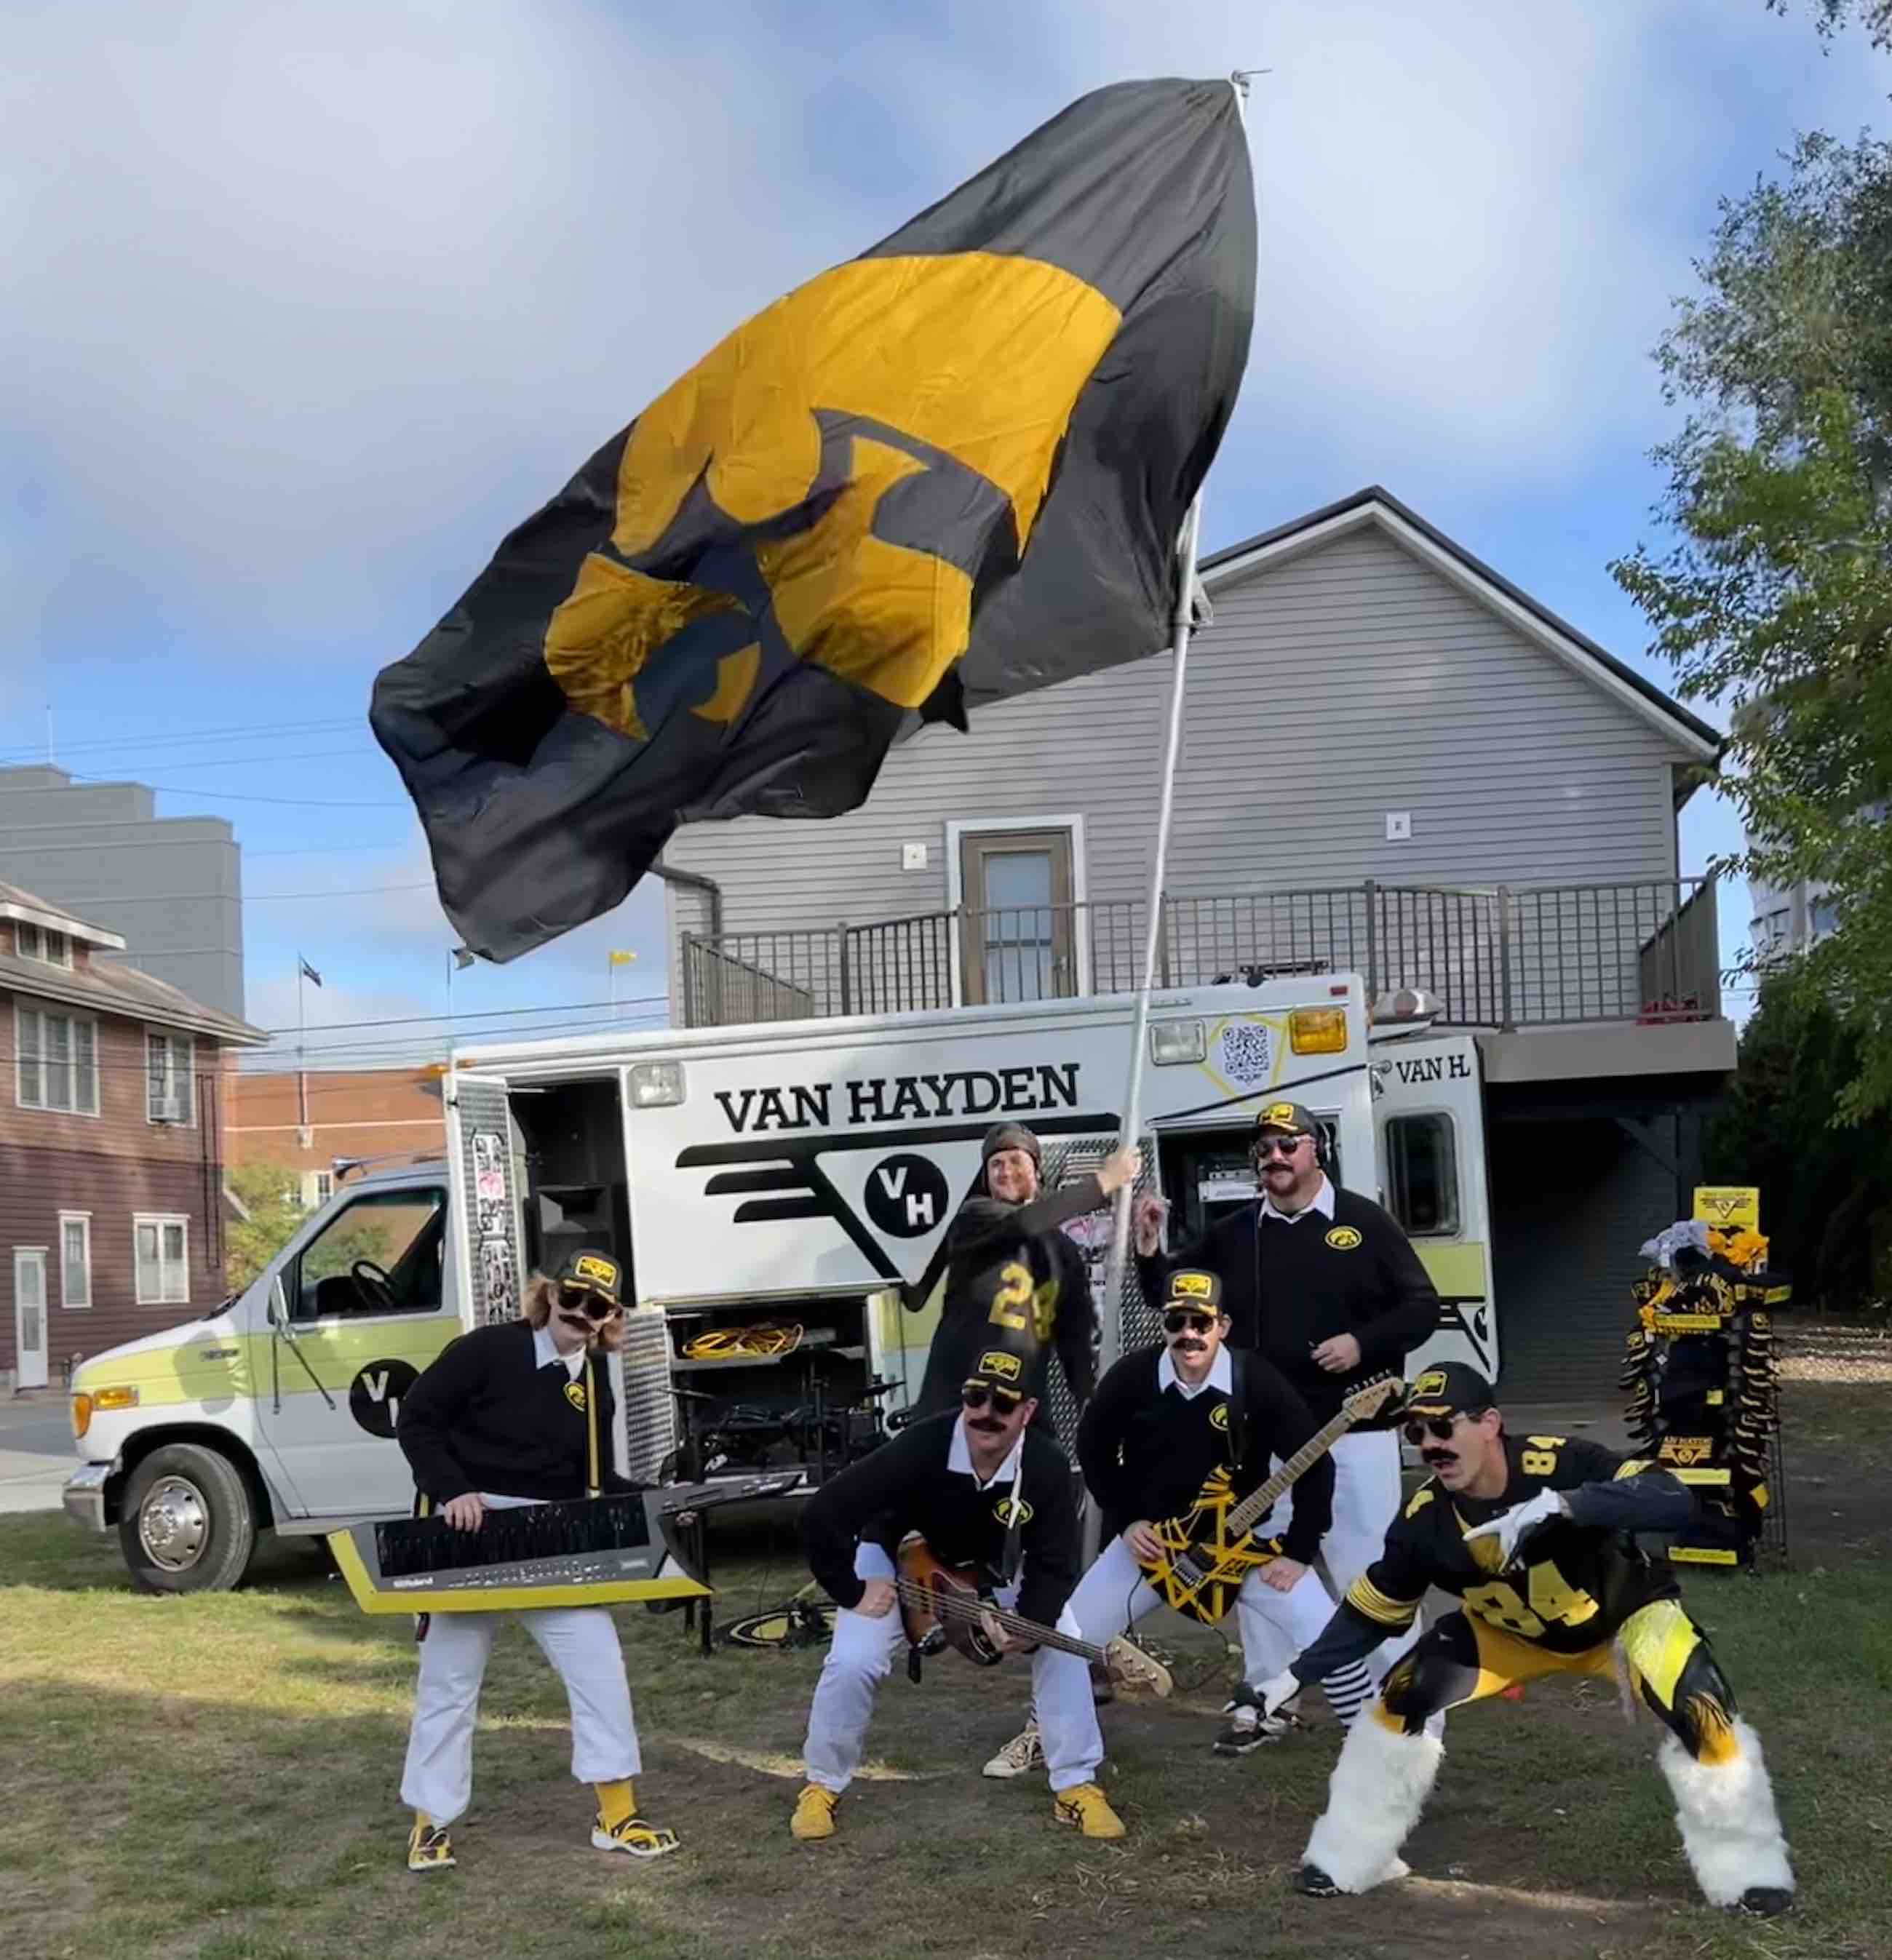 Van Hayden Band with a large Iowa Hawkeye flag and a person dressed up as Nile Kinnick